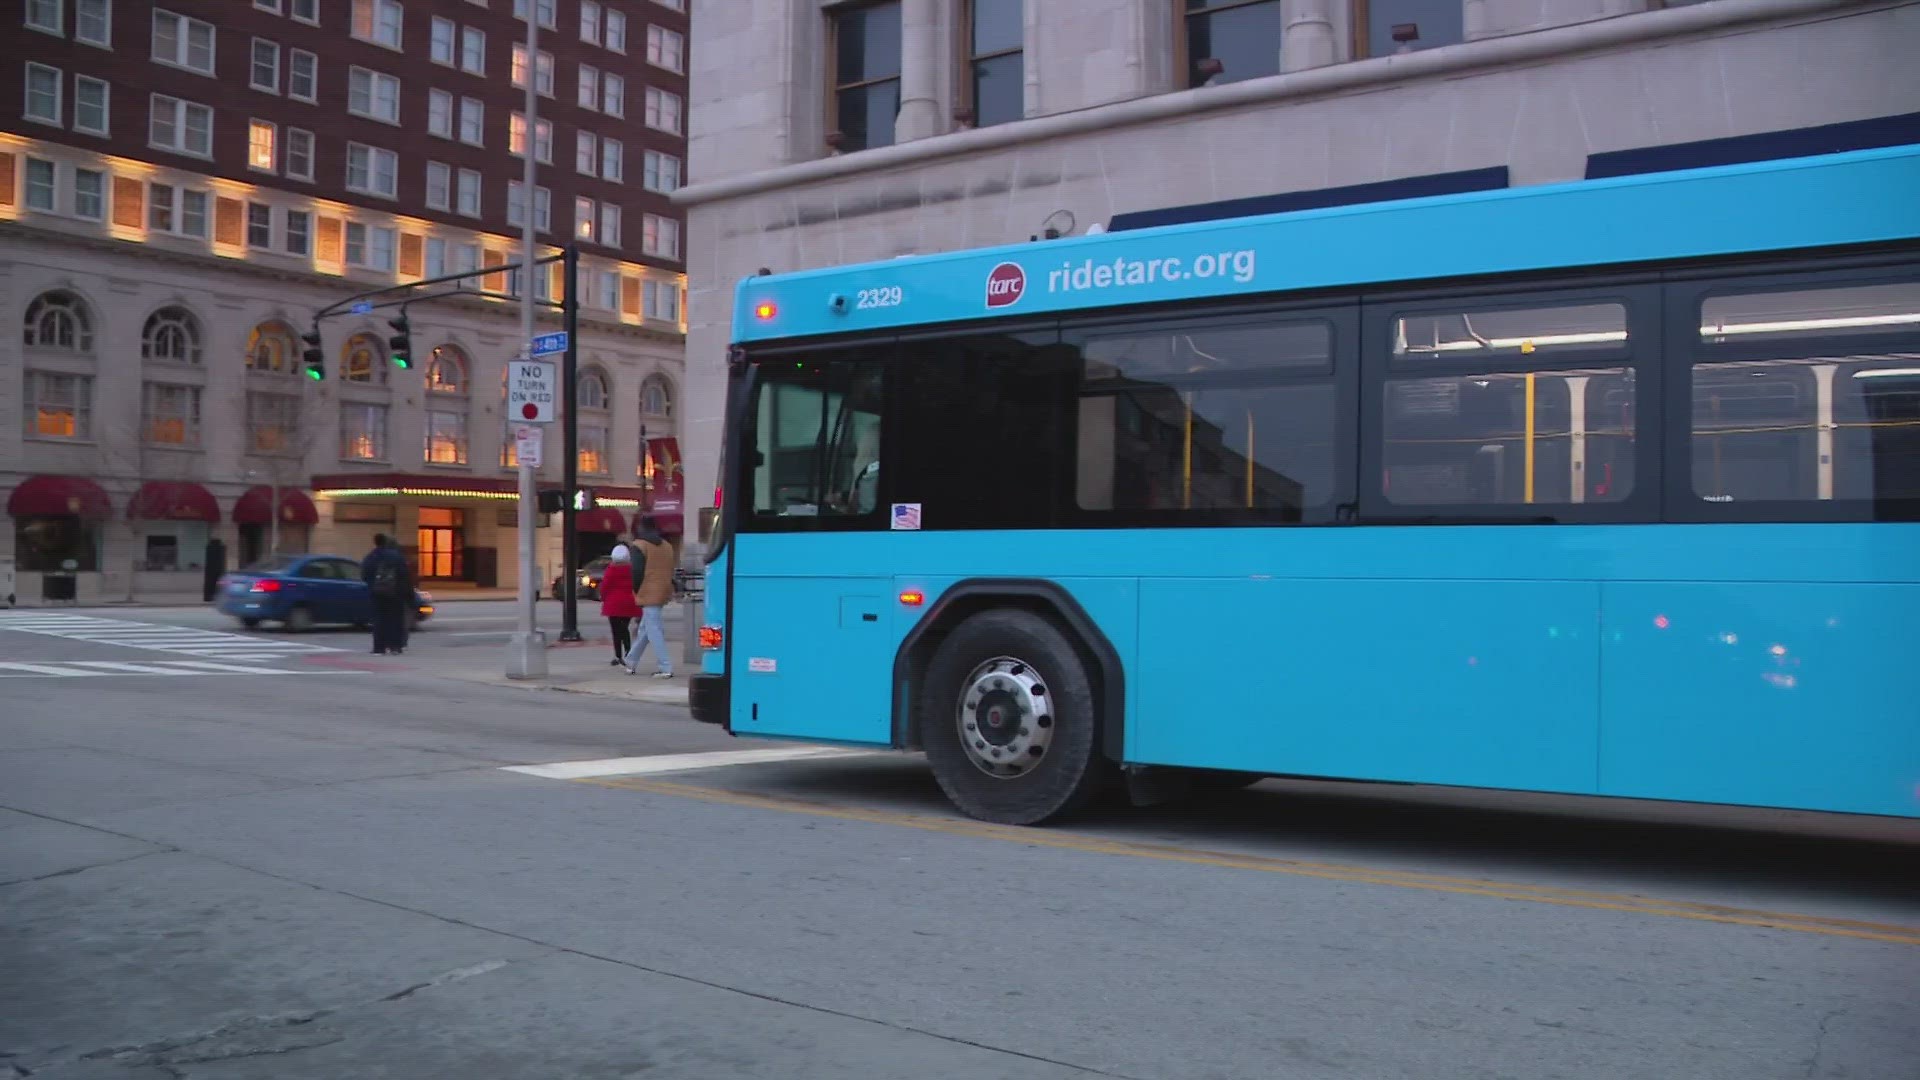 Louisville’s public transportation system is launching a new schedule tracking program to some of its most popular routes around the city.